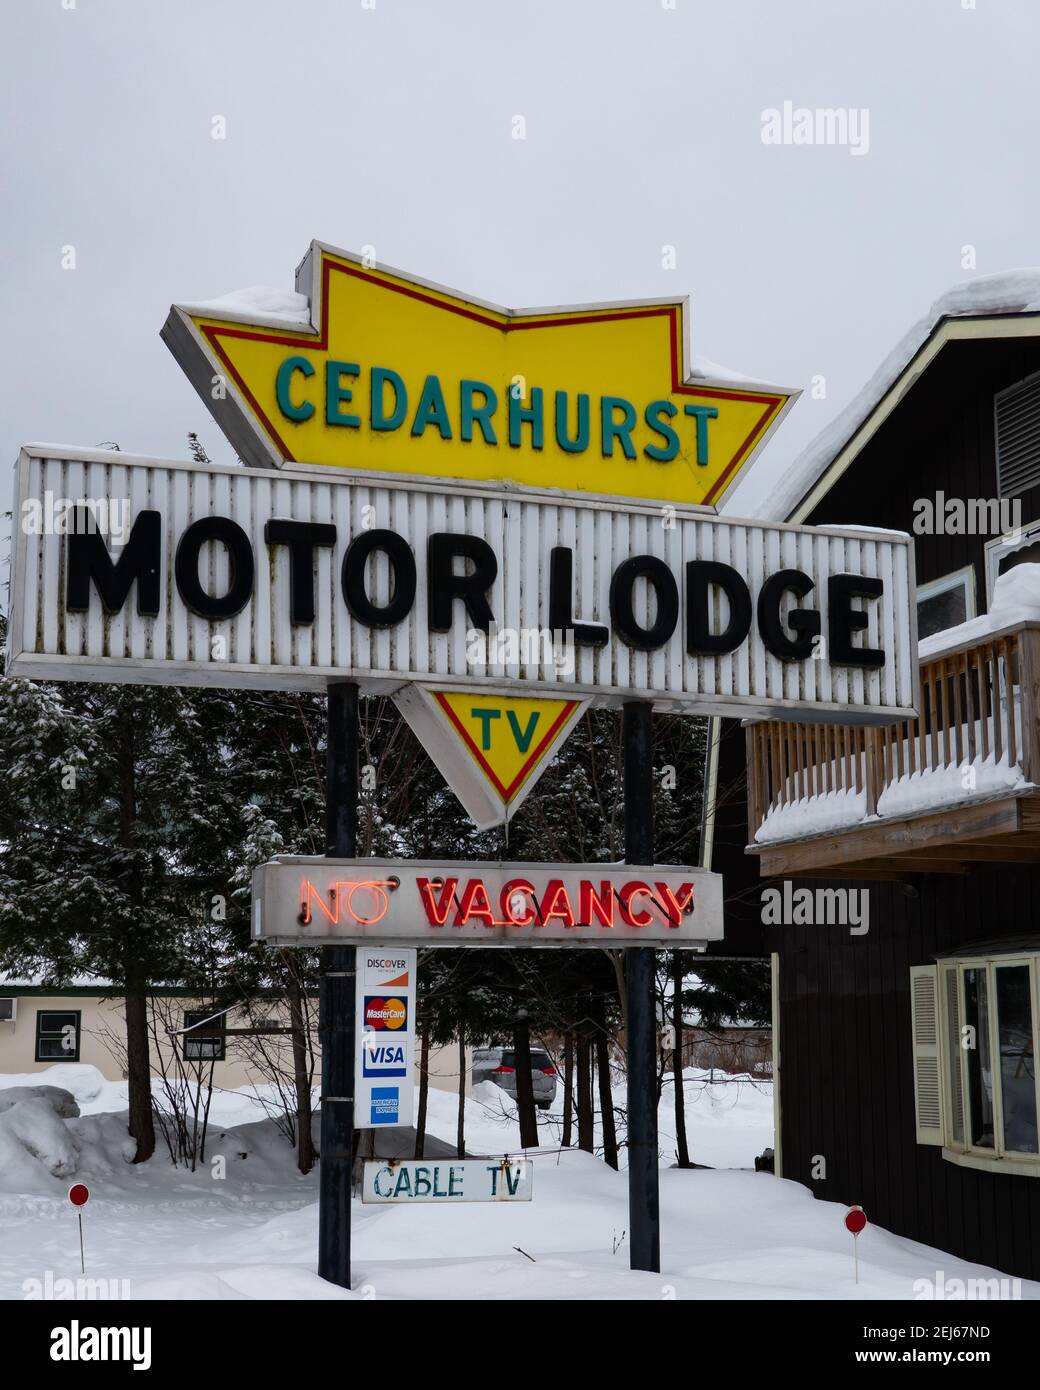 A sign for the Cedarhurst Motor Lodge in Speculator, NY USA in the Adirondack Mountains in winter Stock Photo